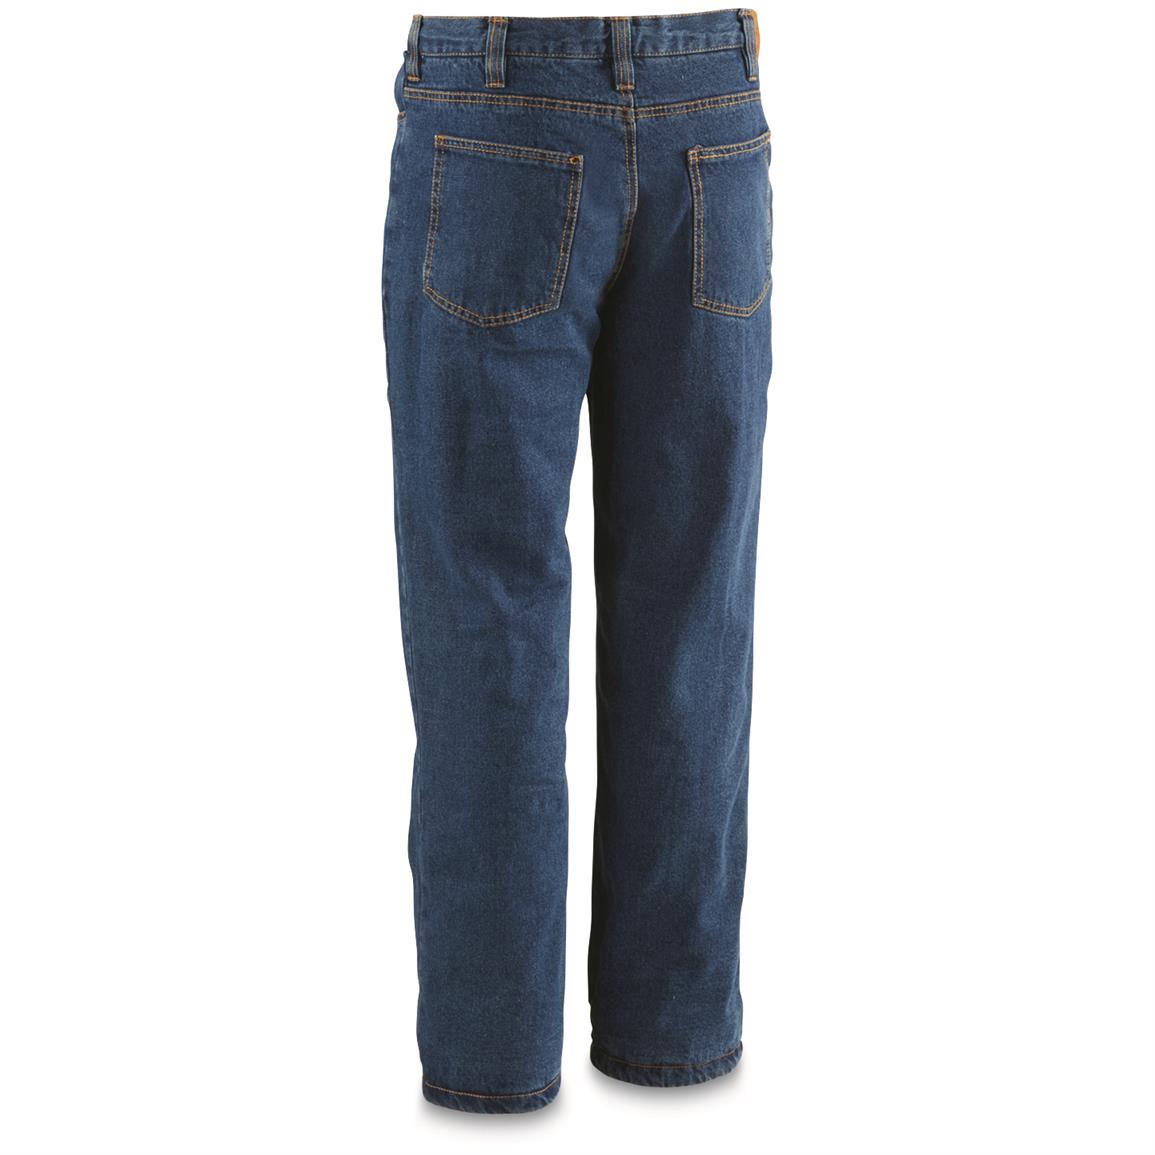 Guide Gear Men's Insulated Stone Washed Jeans, 100 Grams - 221528 ...